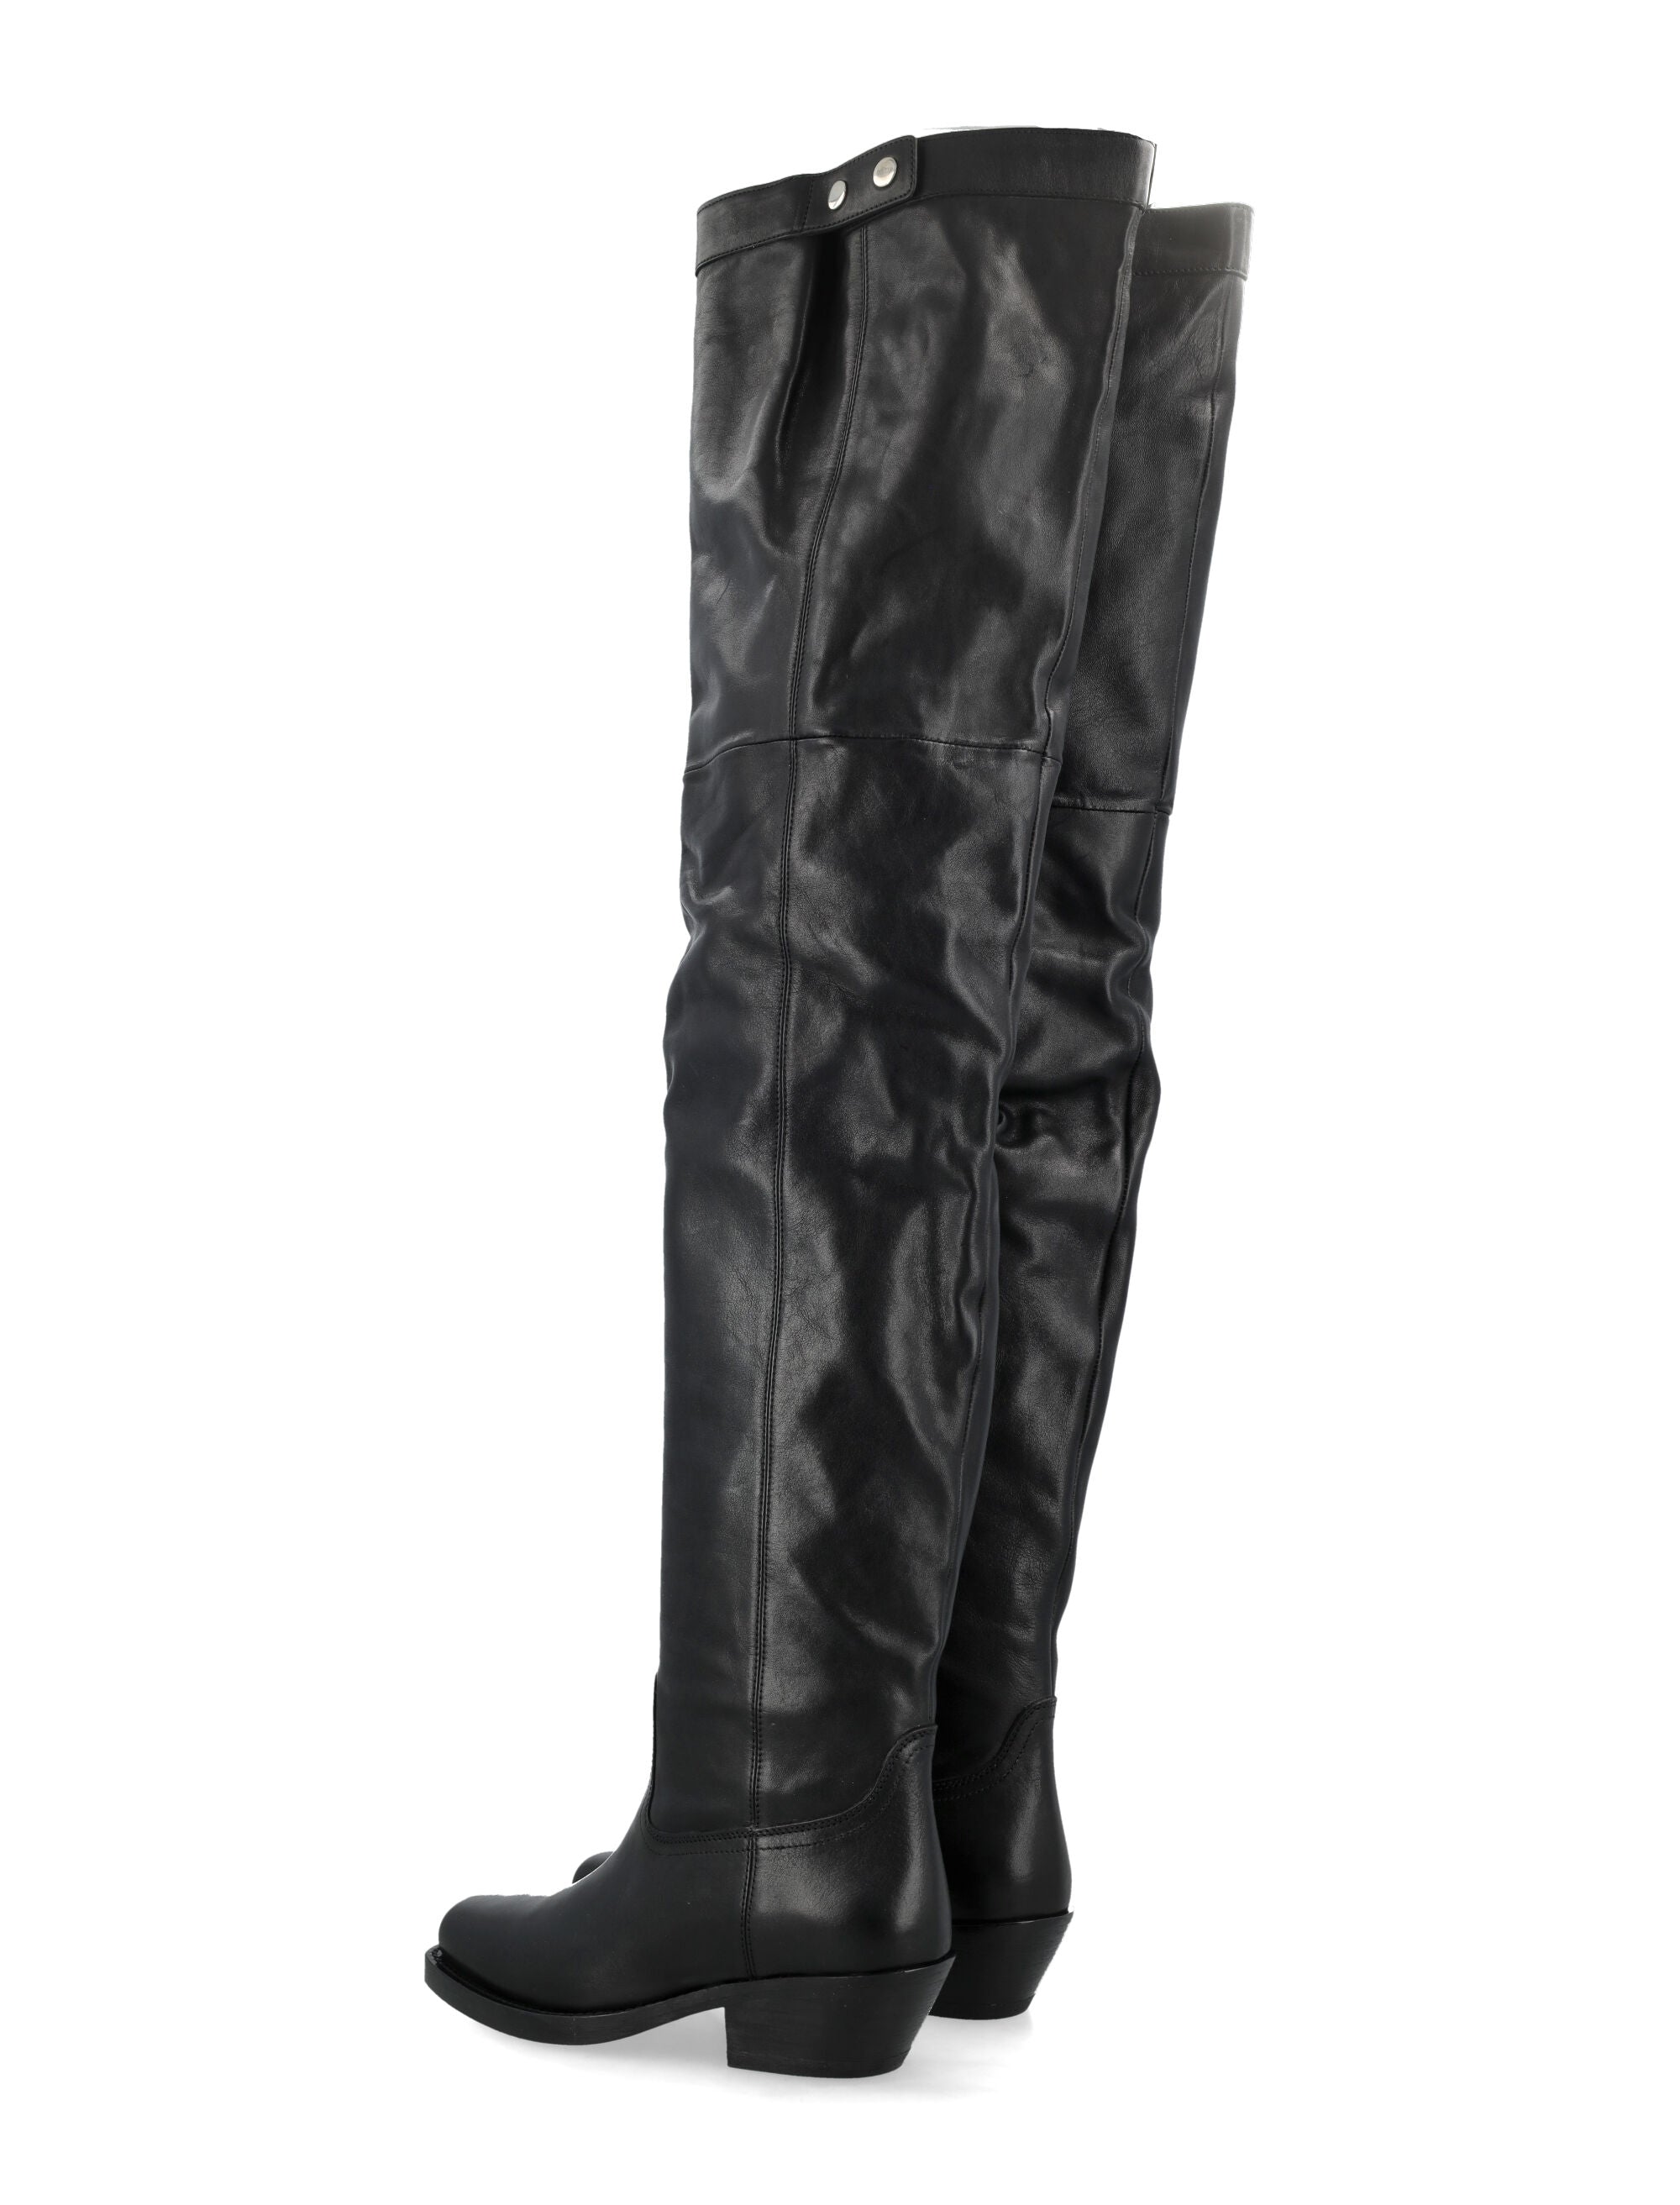 ISABEL_MARANT_Amati_over_knee_boots_24ACD0011FAB3A23S_01BK_4.jpg